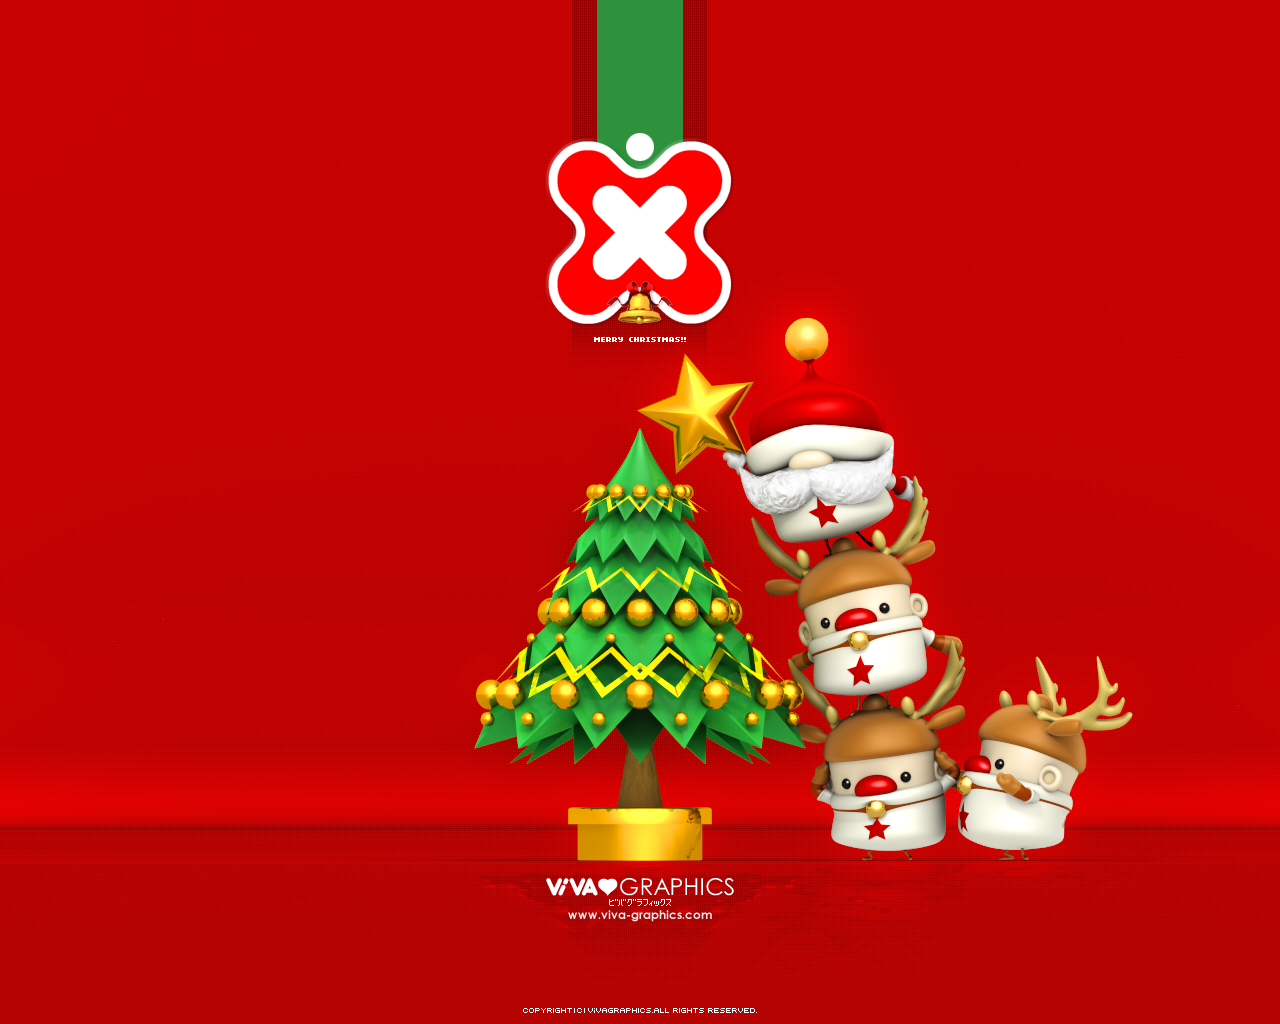 Christmas Design Resources Icons Wallpaper Wp Themes Brushes